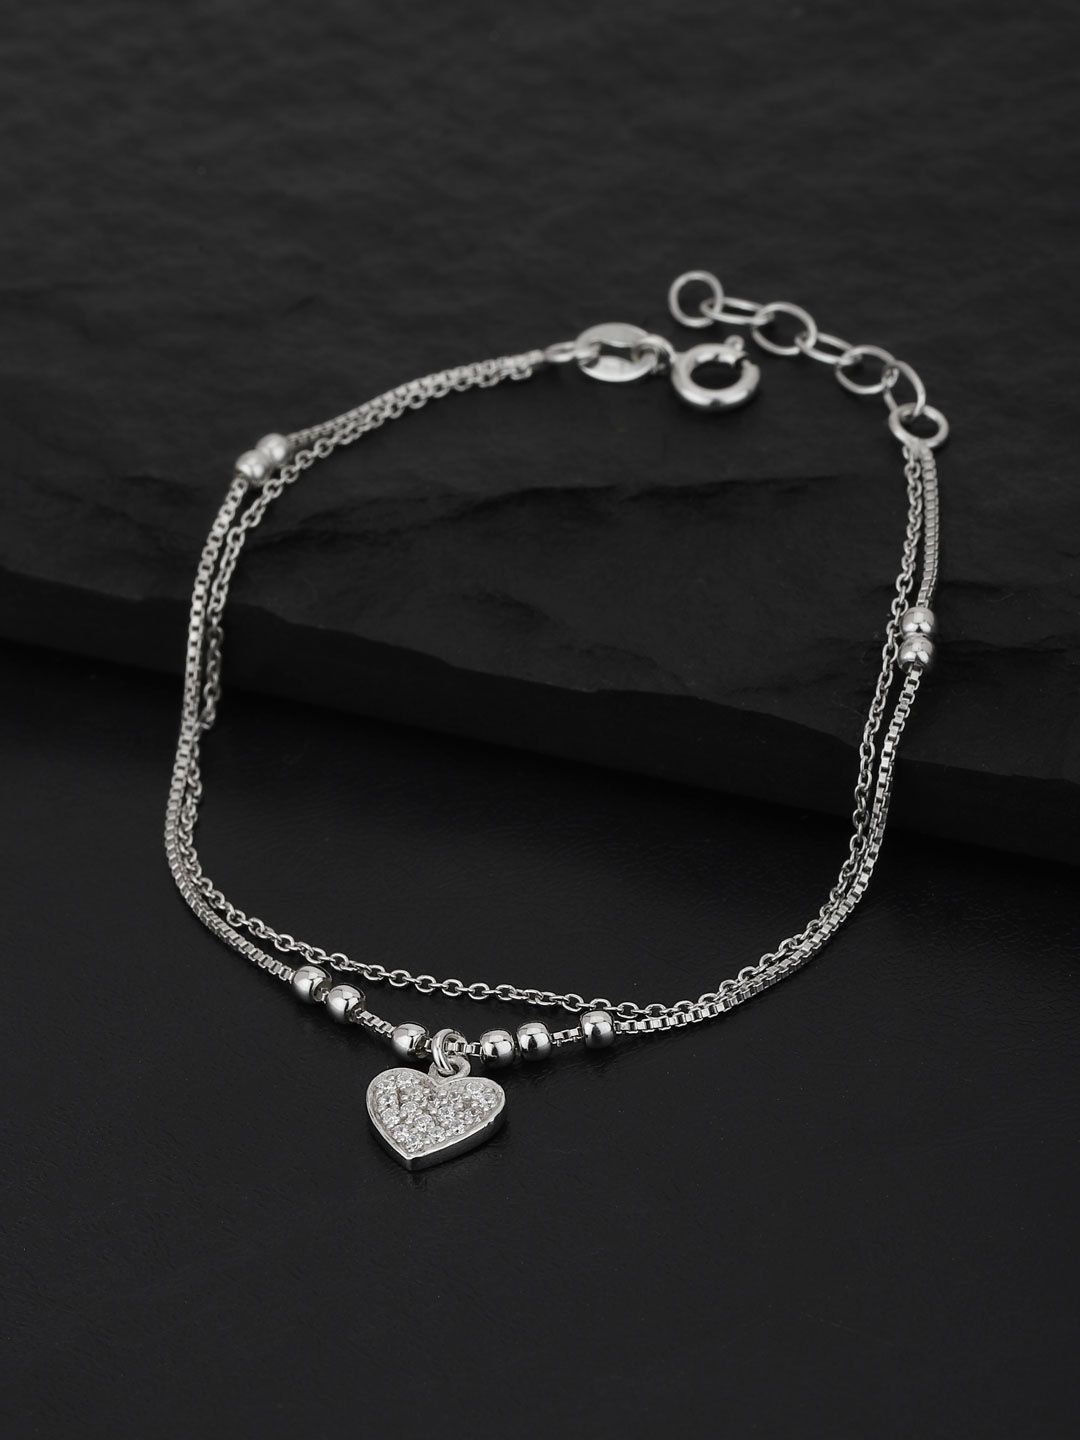 VANBELLE Women 925 Sterling Silver CZ Handcrafted Rhodium-Plated Charm Bracelet Price in India